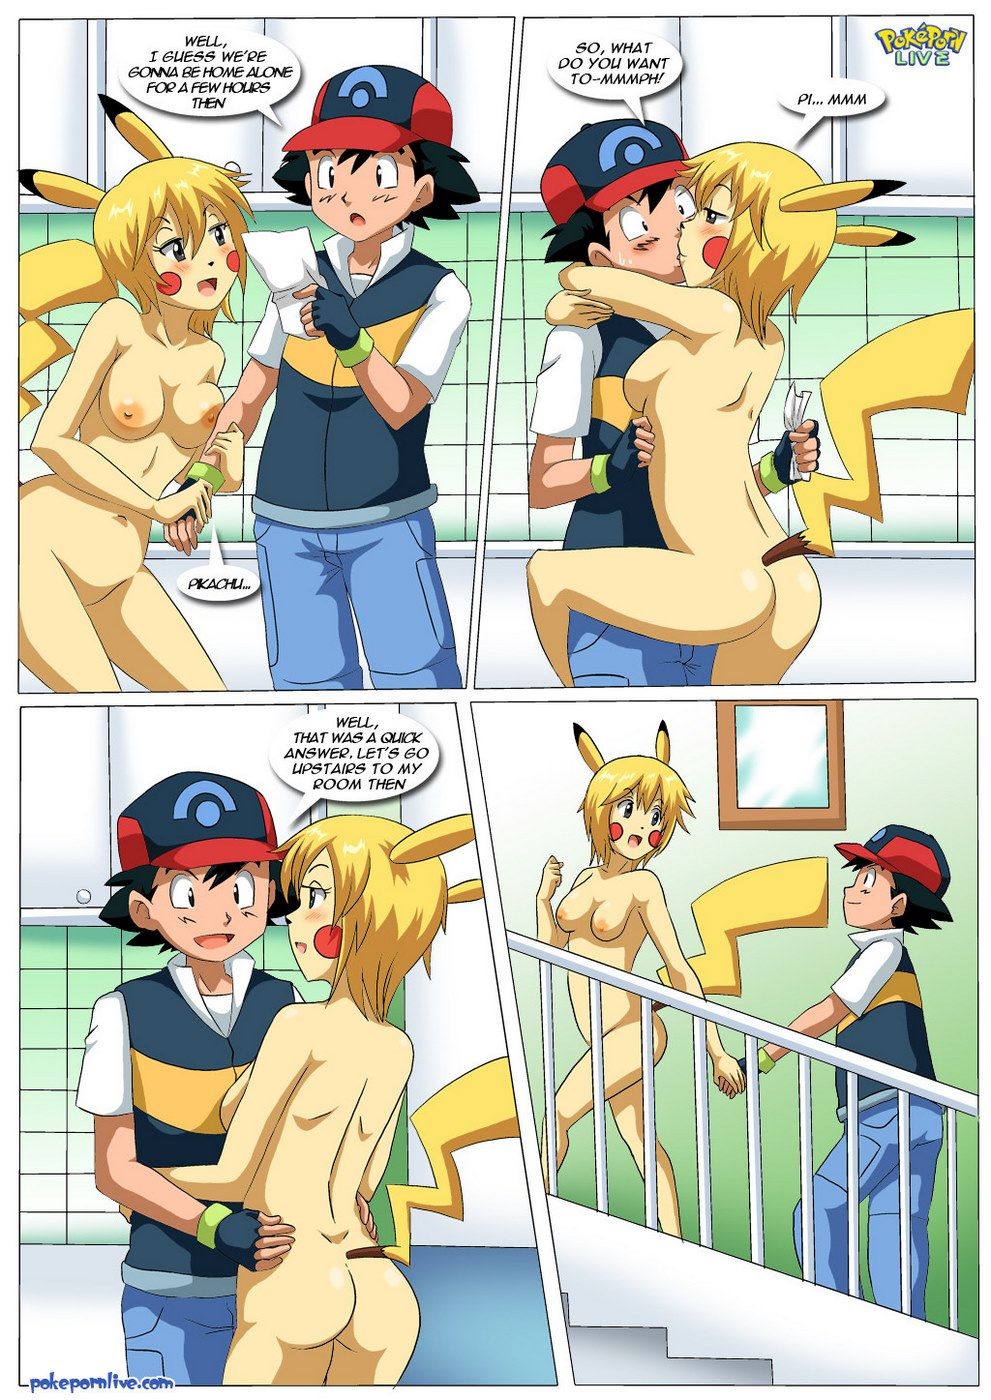 PalComix,What happens in pallet town - Pokemon page 3